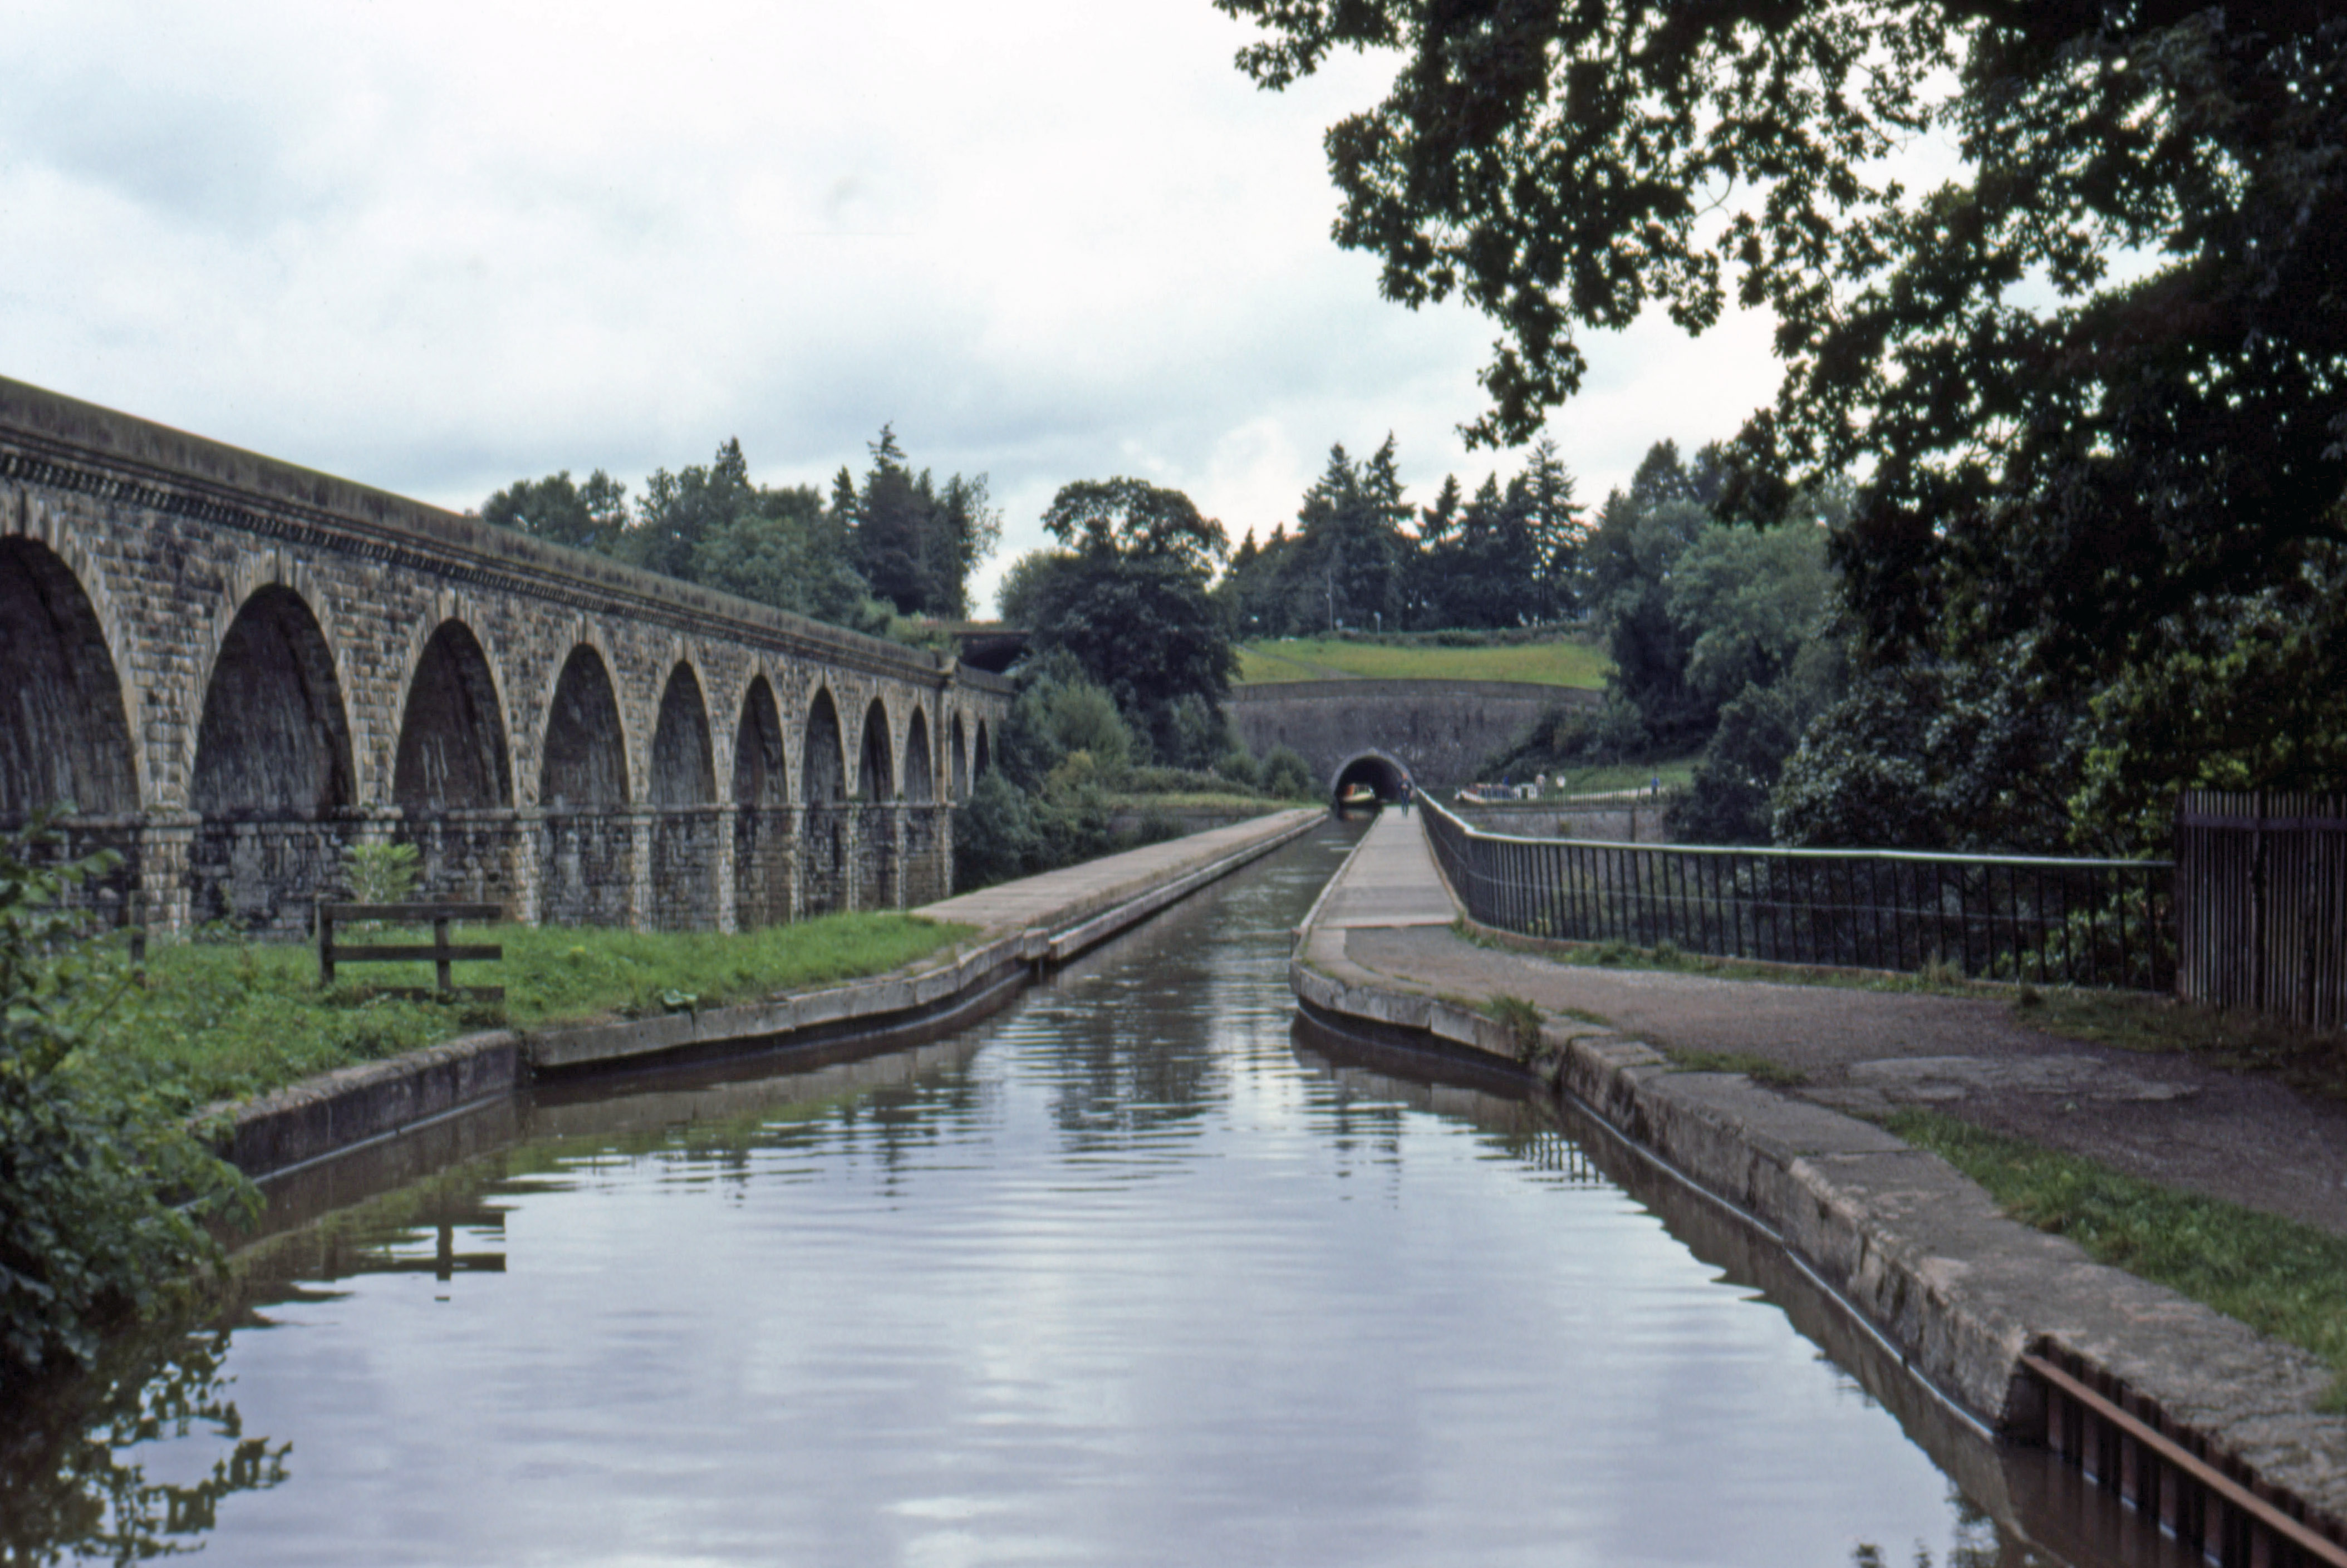 8408305 Sep 1984 - The Chirk aqueduct, with the Chirk viaduct alongside.